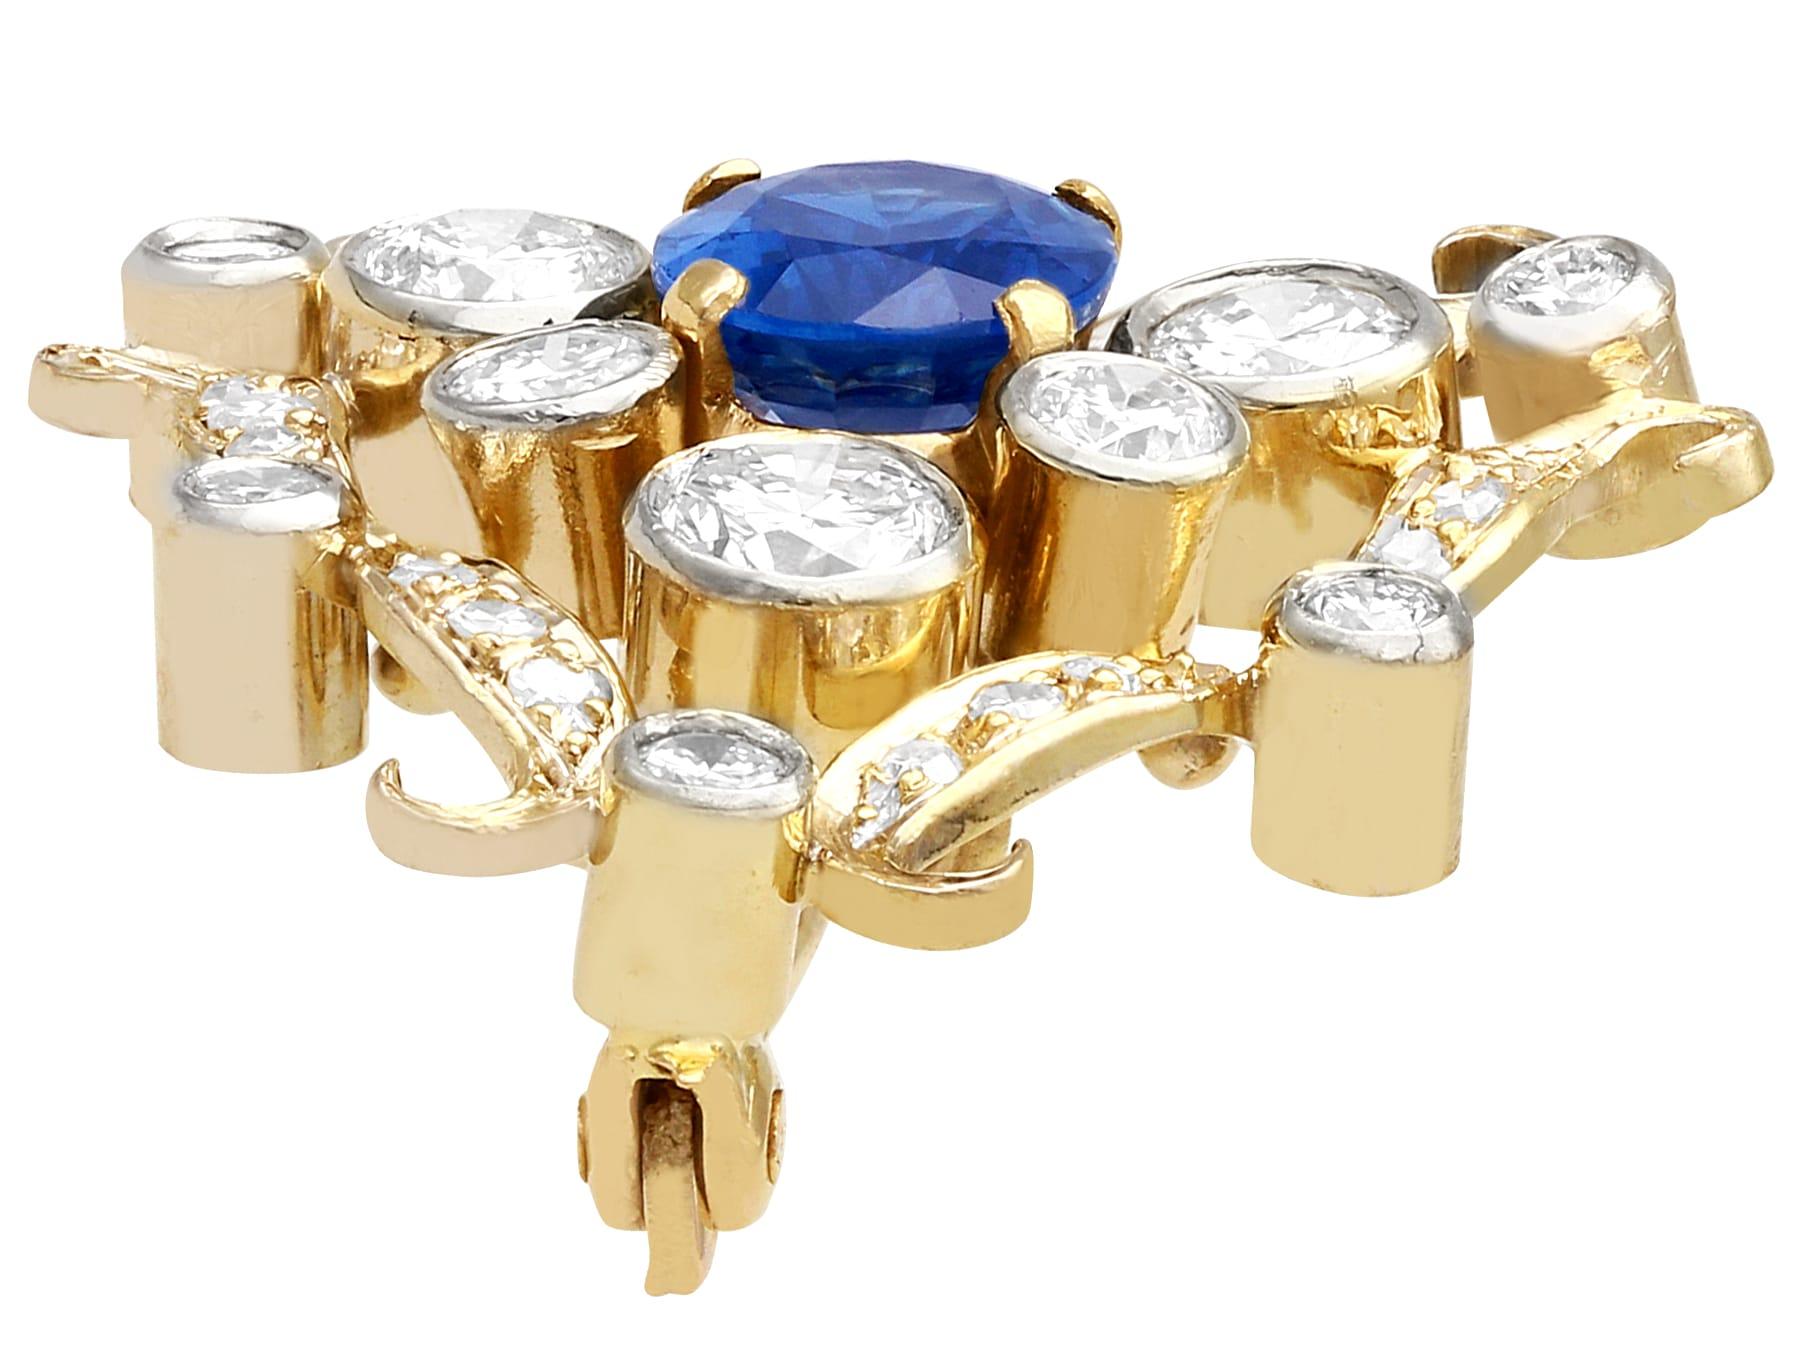 Oval Cut Antique 1.53 Carat Sapphire and 1 Carat Diamond Yellow Gold Brooch, Circa 1920 For Sale